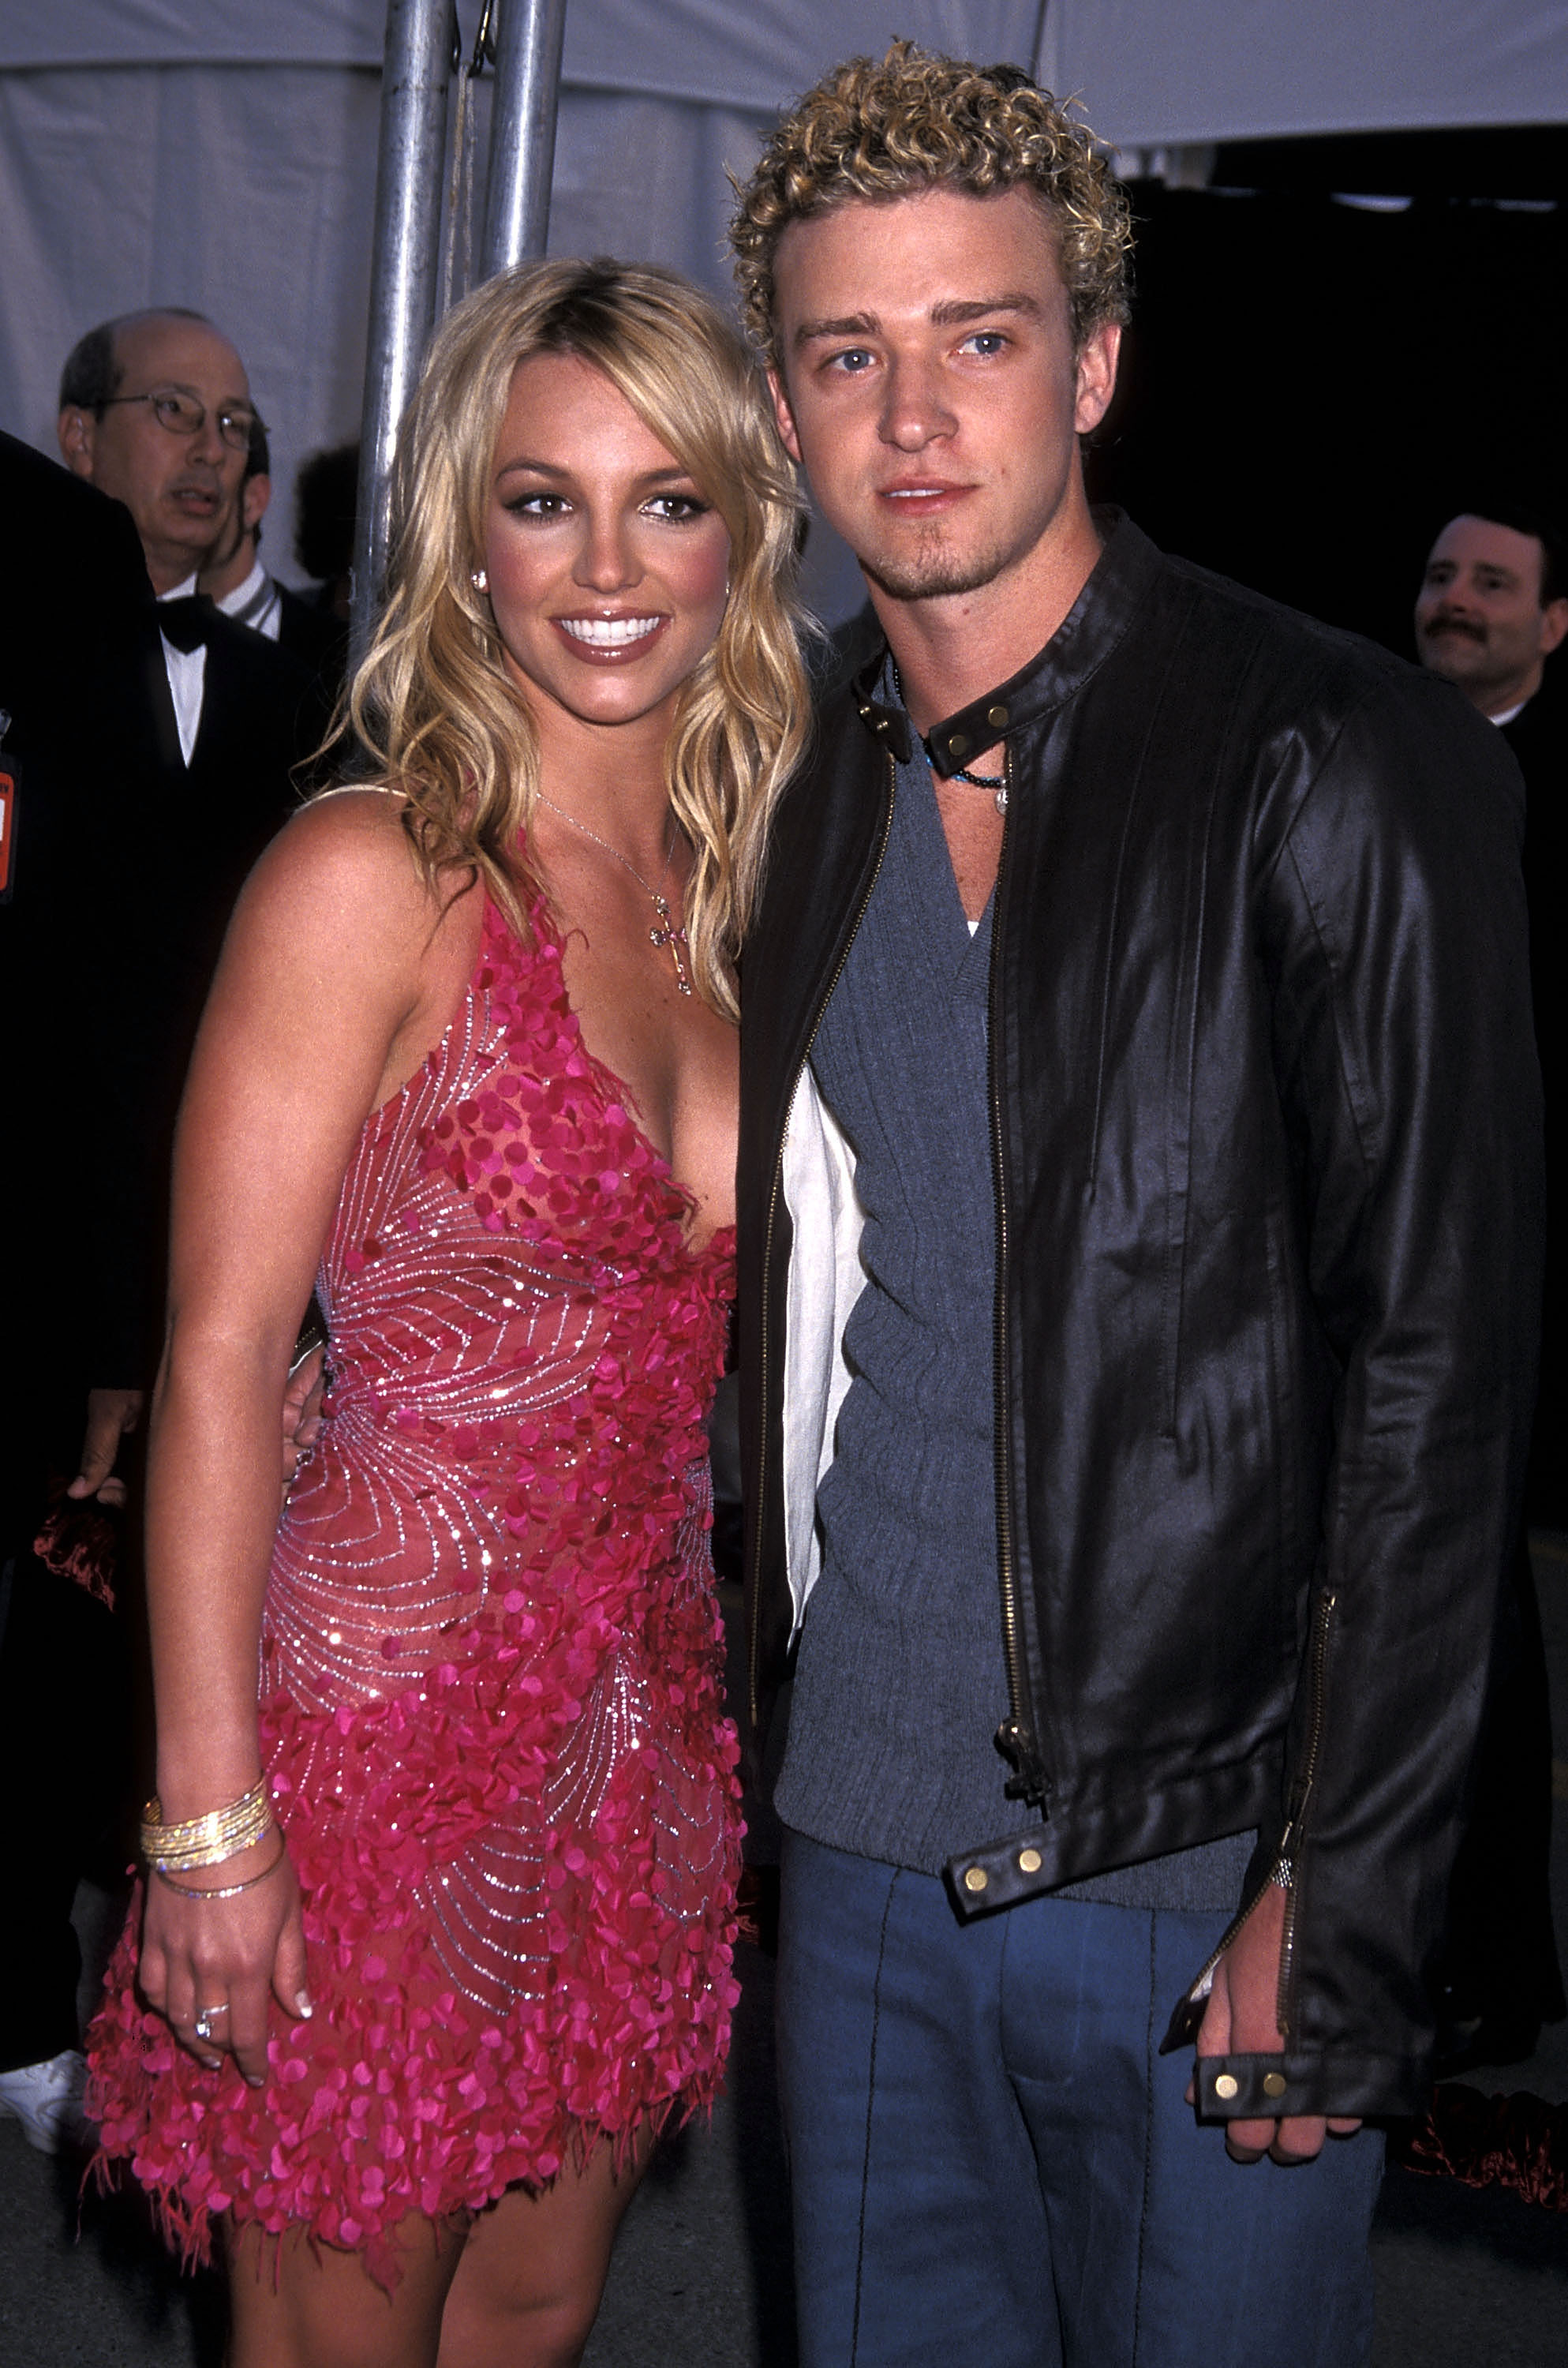 Britney Spears and Justin Timberlake at the 29th Annual American Music Awards in Los Angeles, California on January 9, 2002. | Source: Getty Images